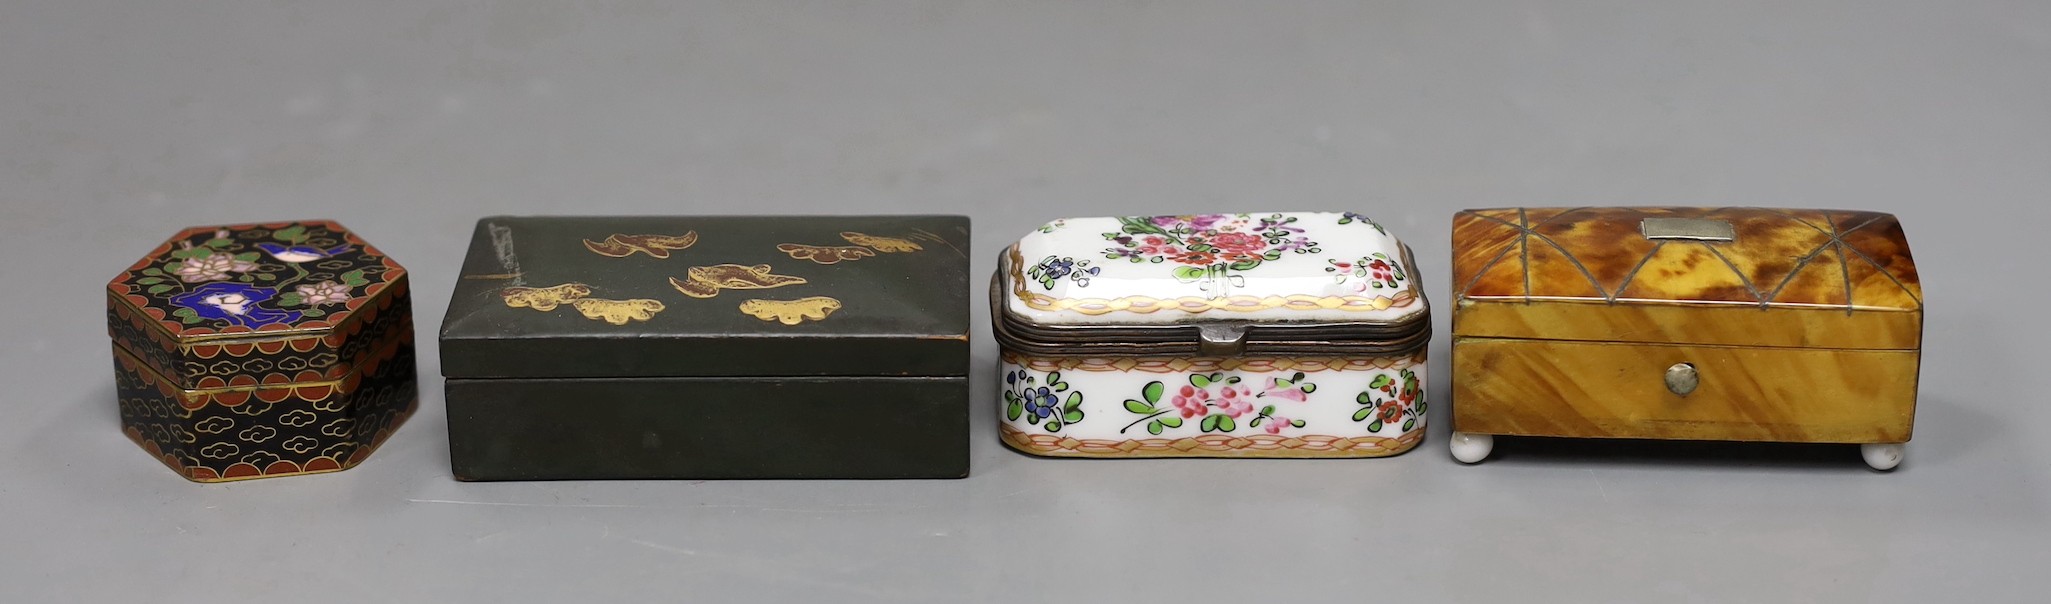 A Victorian tortoiseshell snuff box, porcelain box, enamel box and green lacquer box, largest lacquer box: 8cms high